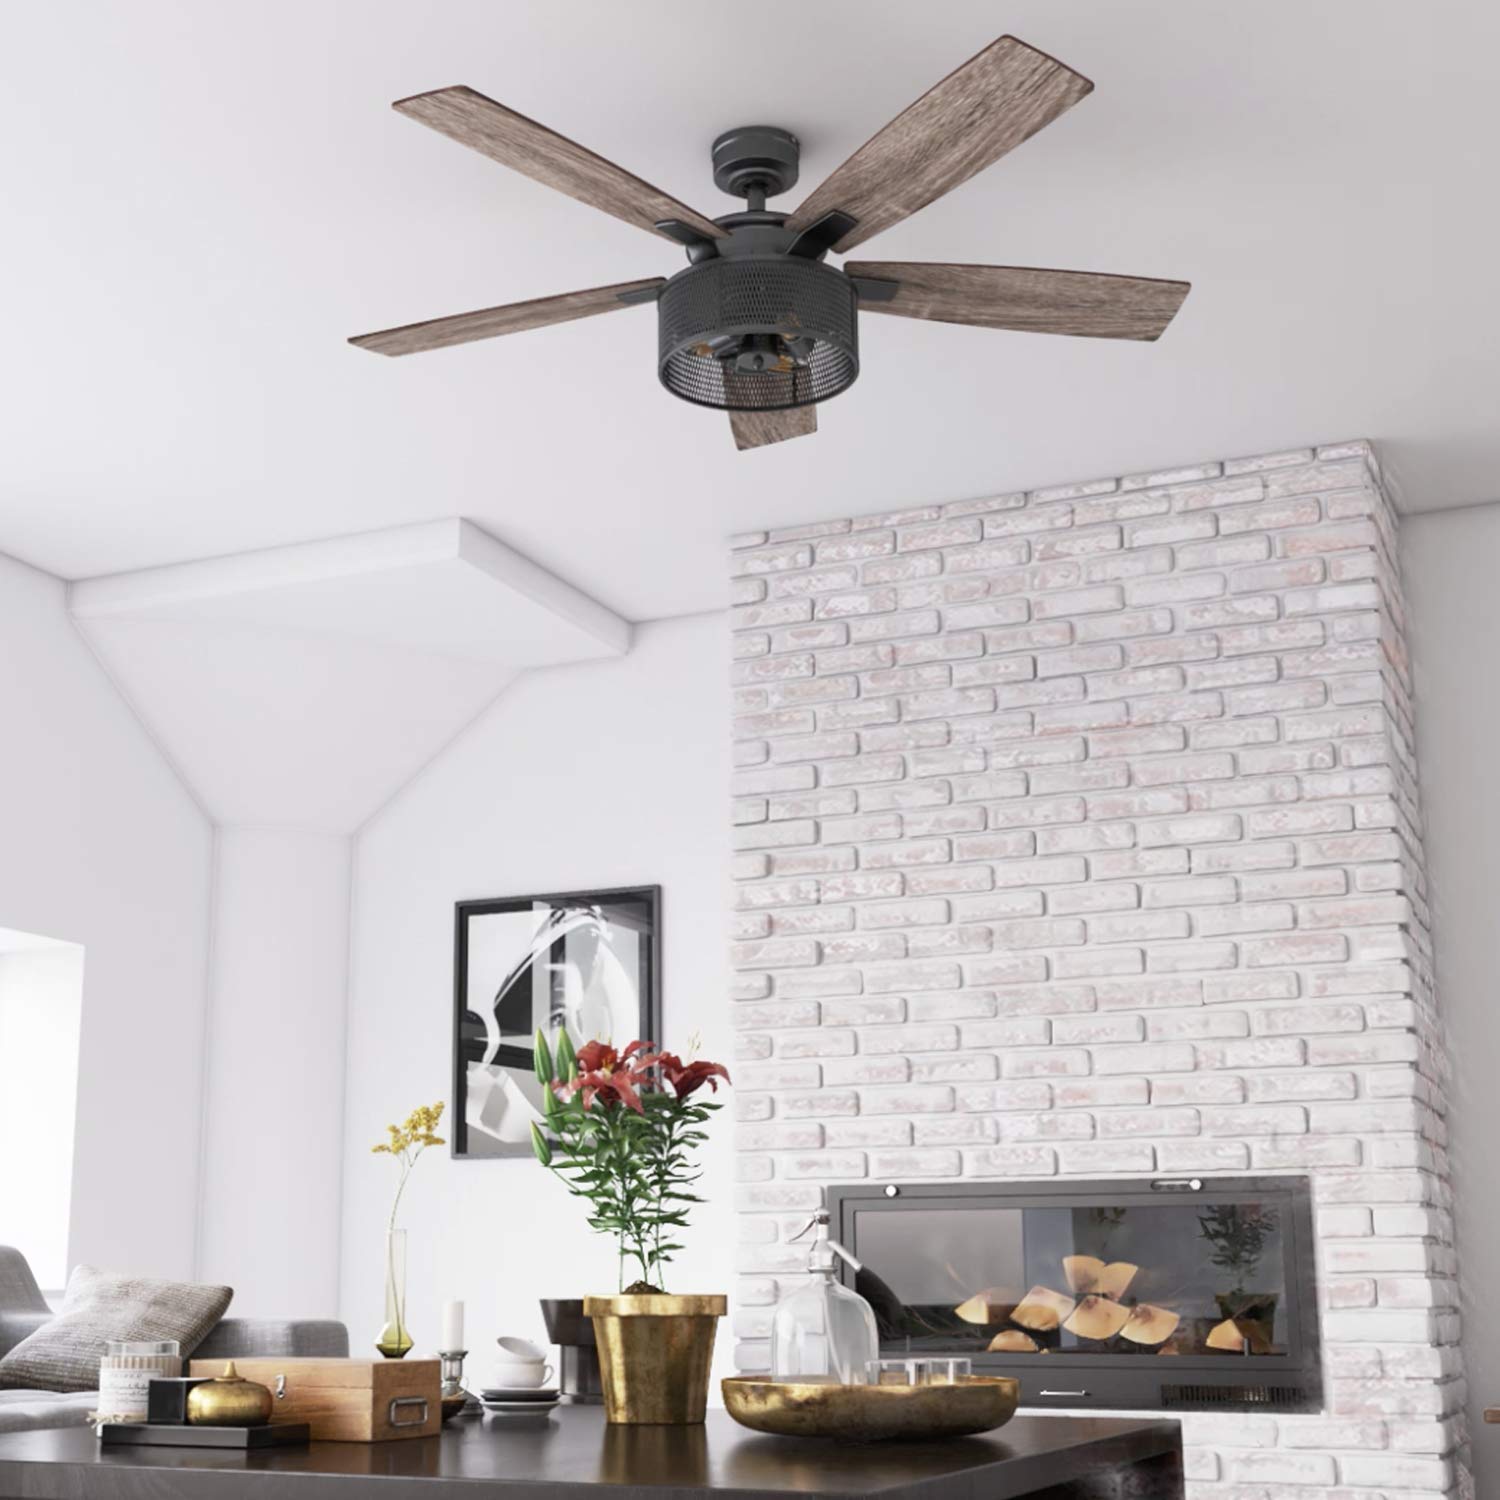 Honeywell Ceiling Fans Carnegie, 52 Inch Industrial Style Indoor LED Ceiling Fan with Light